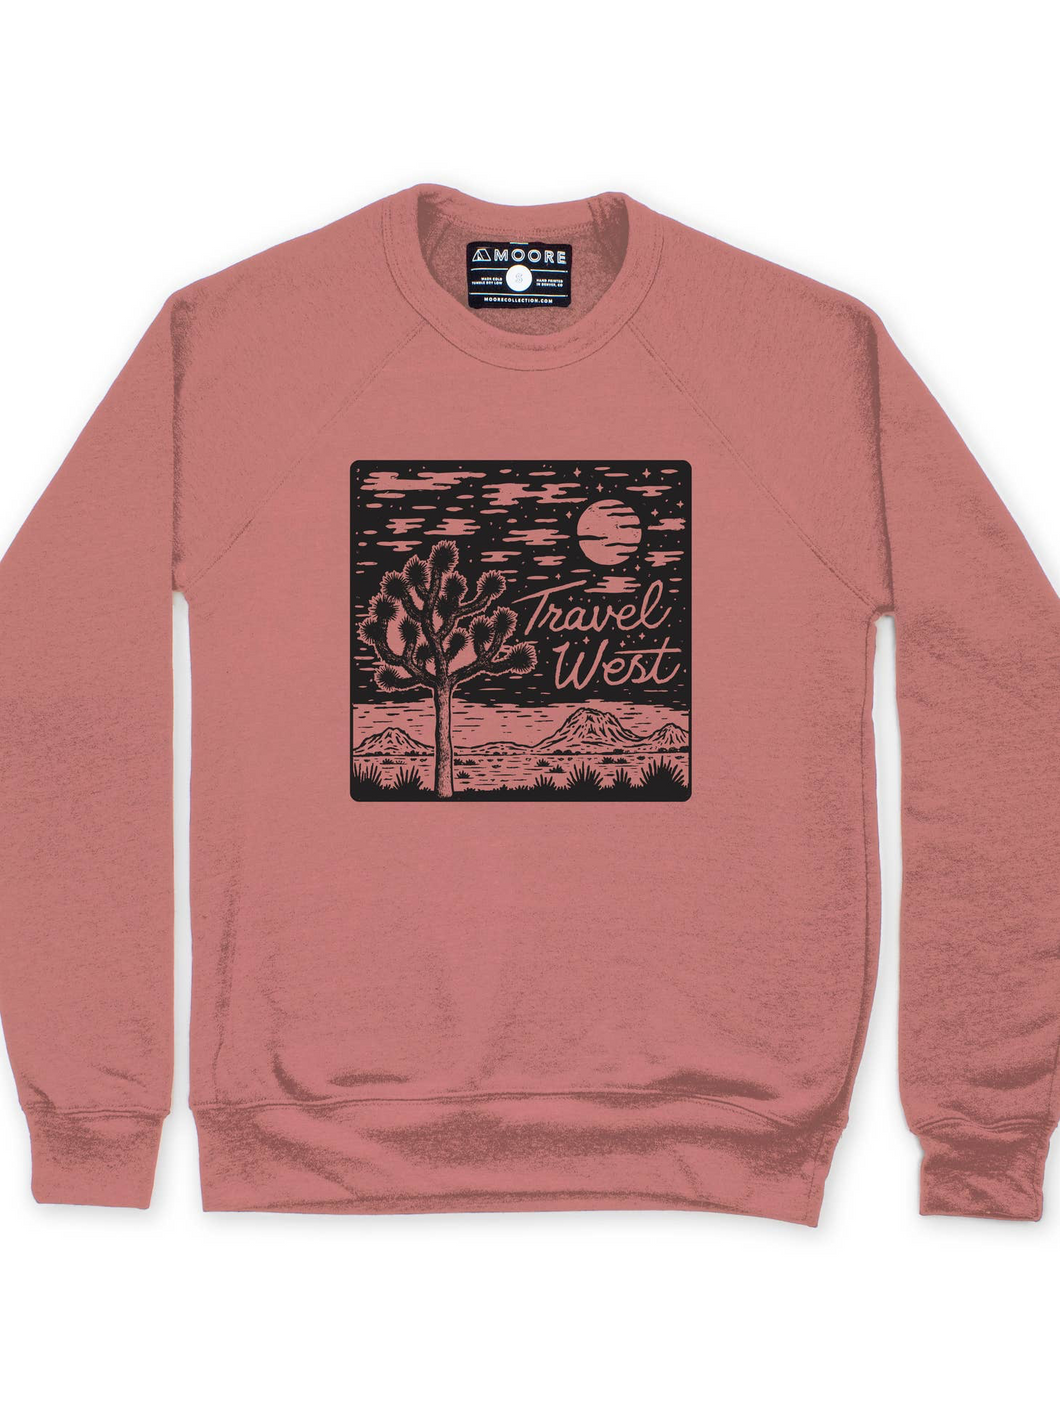 Travel West Crewneck Sweatshirt by Moore Collection